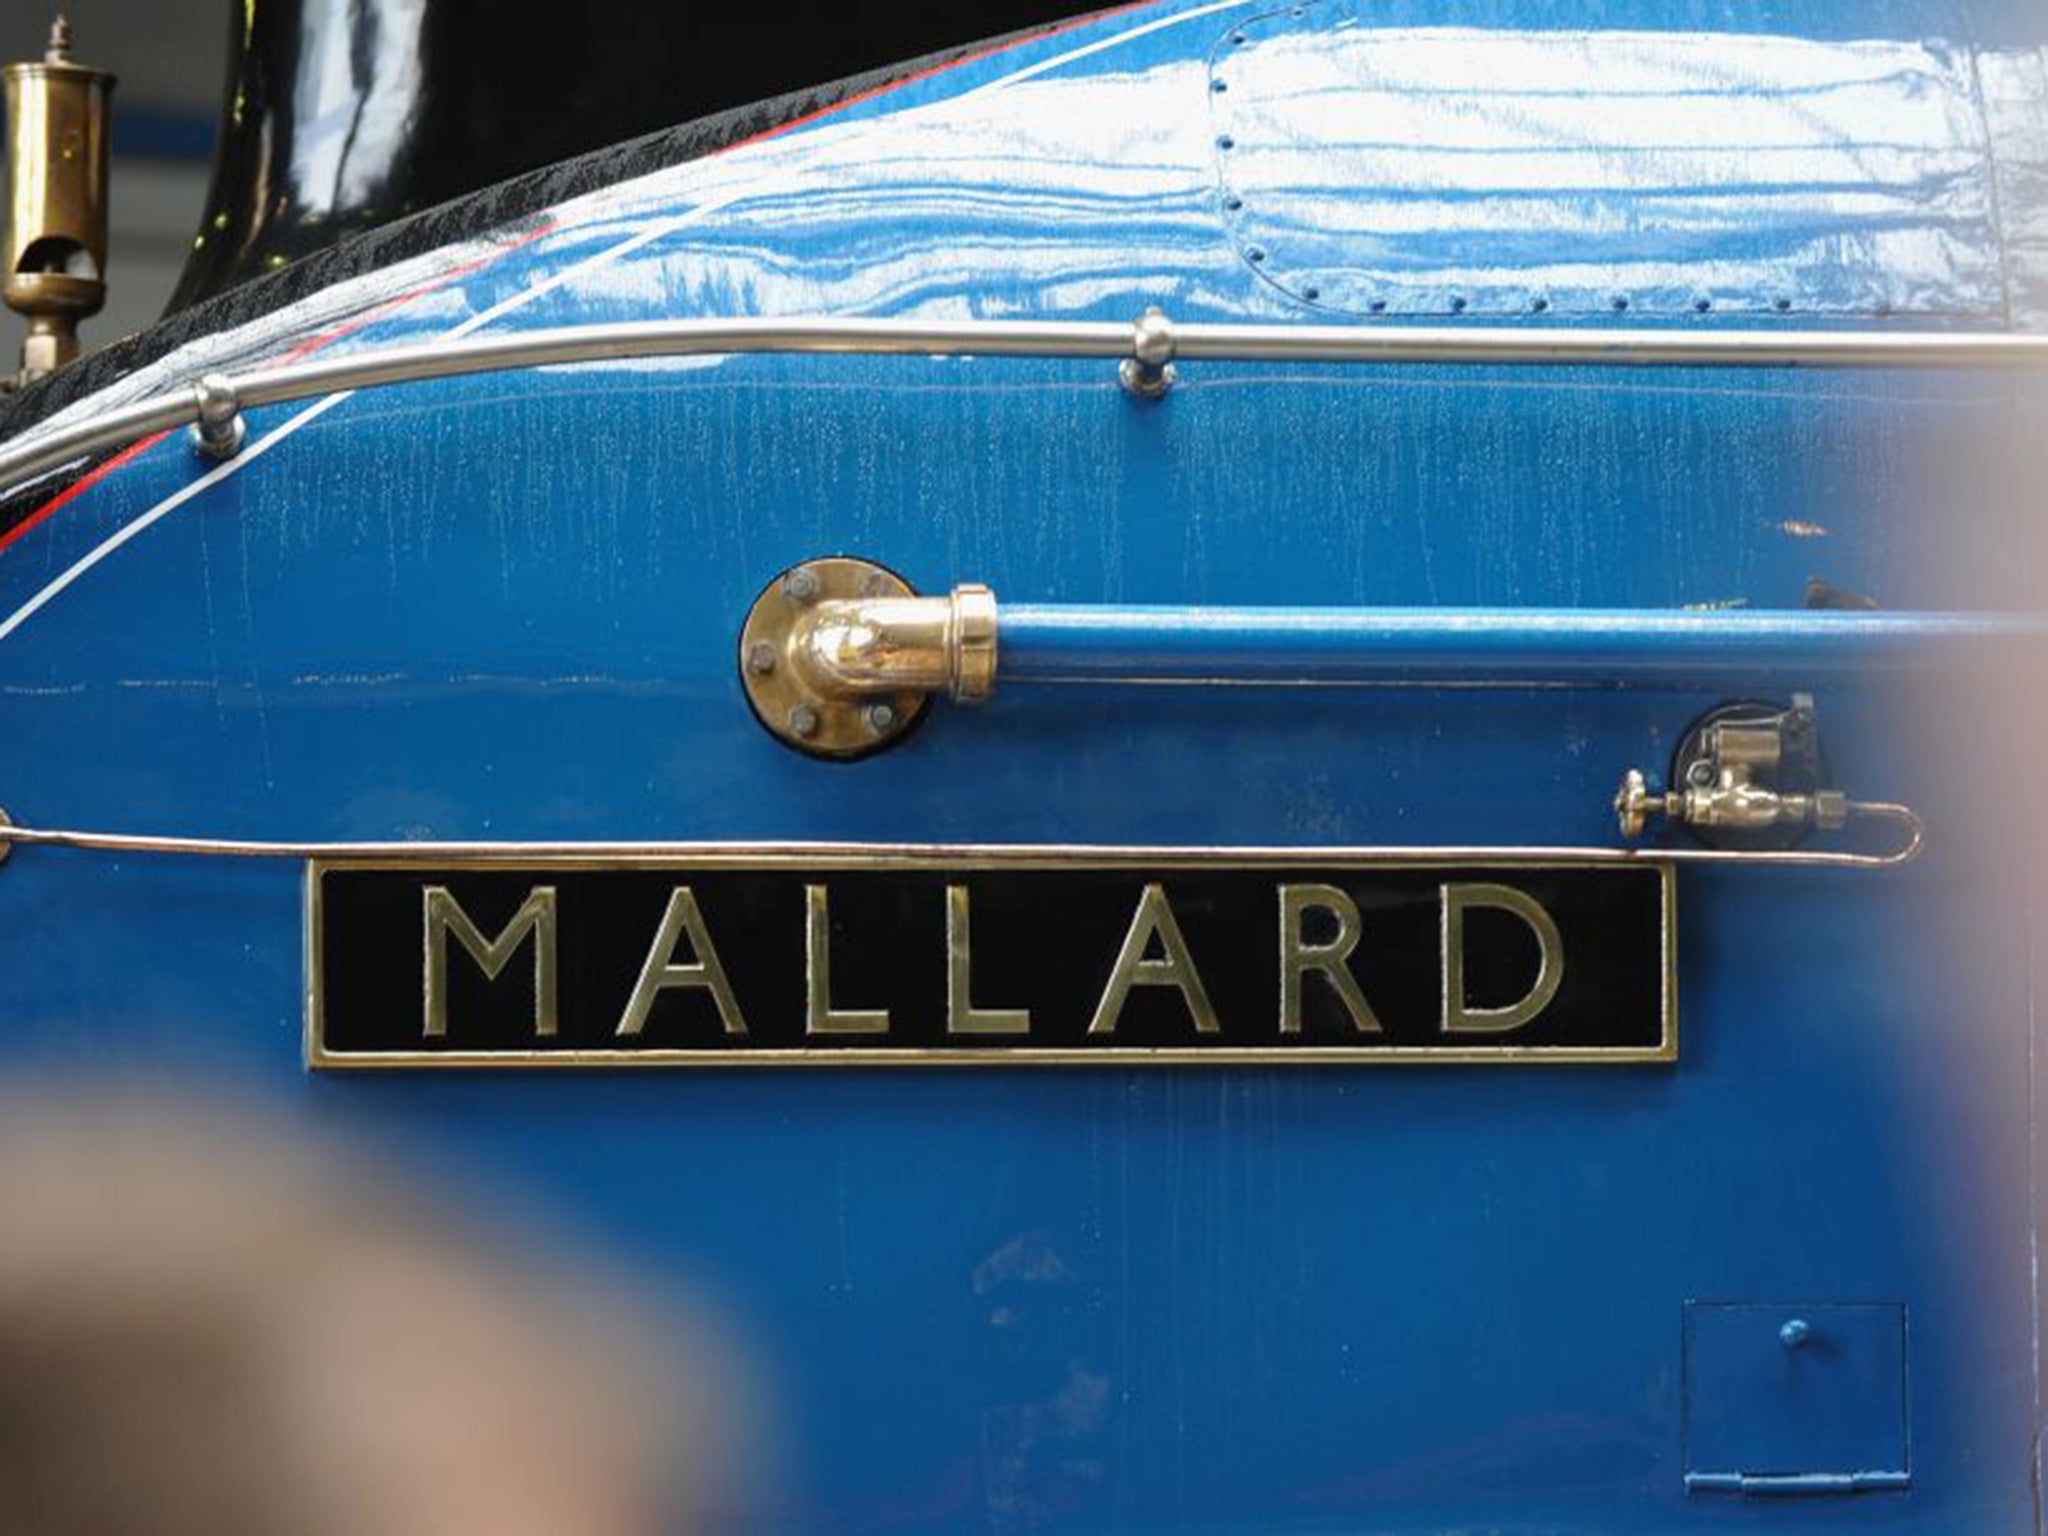 The Number 4468 Mallard locomotive attempted the speed record in 1938. Its 126mph still stands today